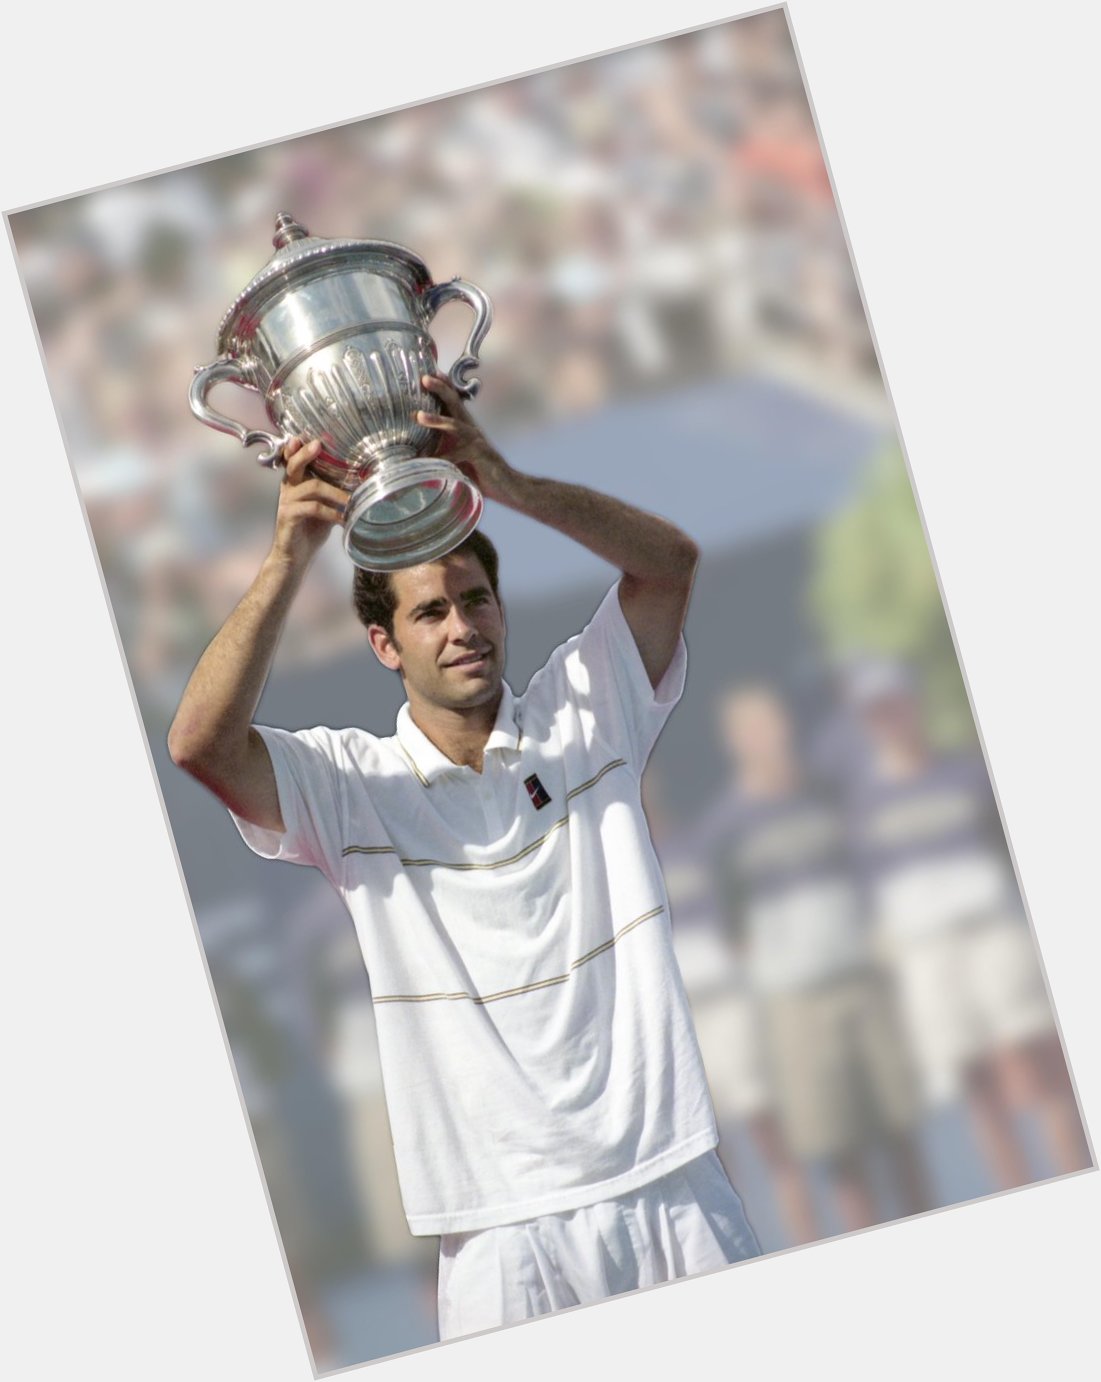 Happy birthday to former no.1 player Pete Sampras, who turned 44 today! 